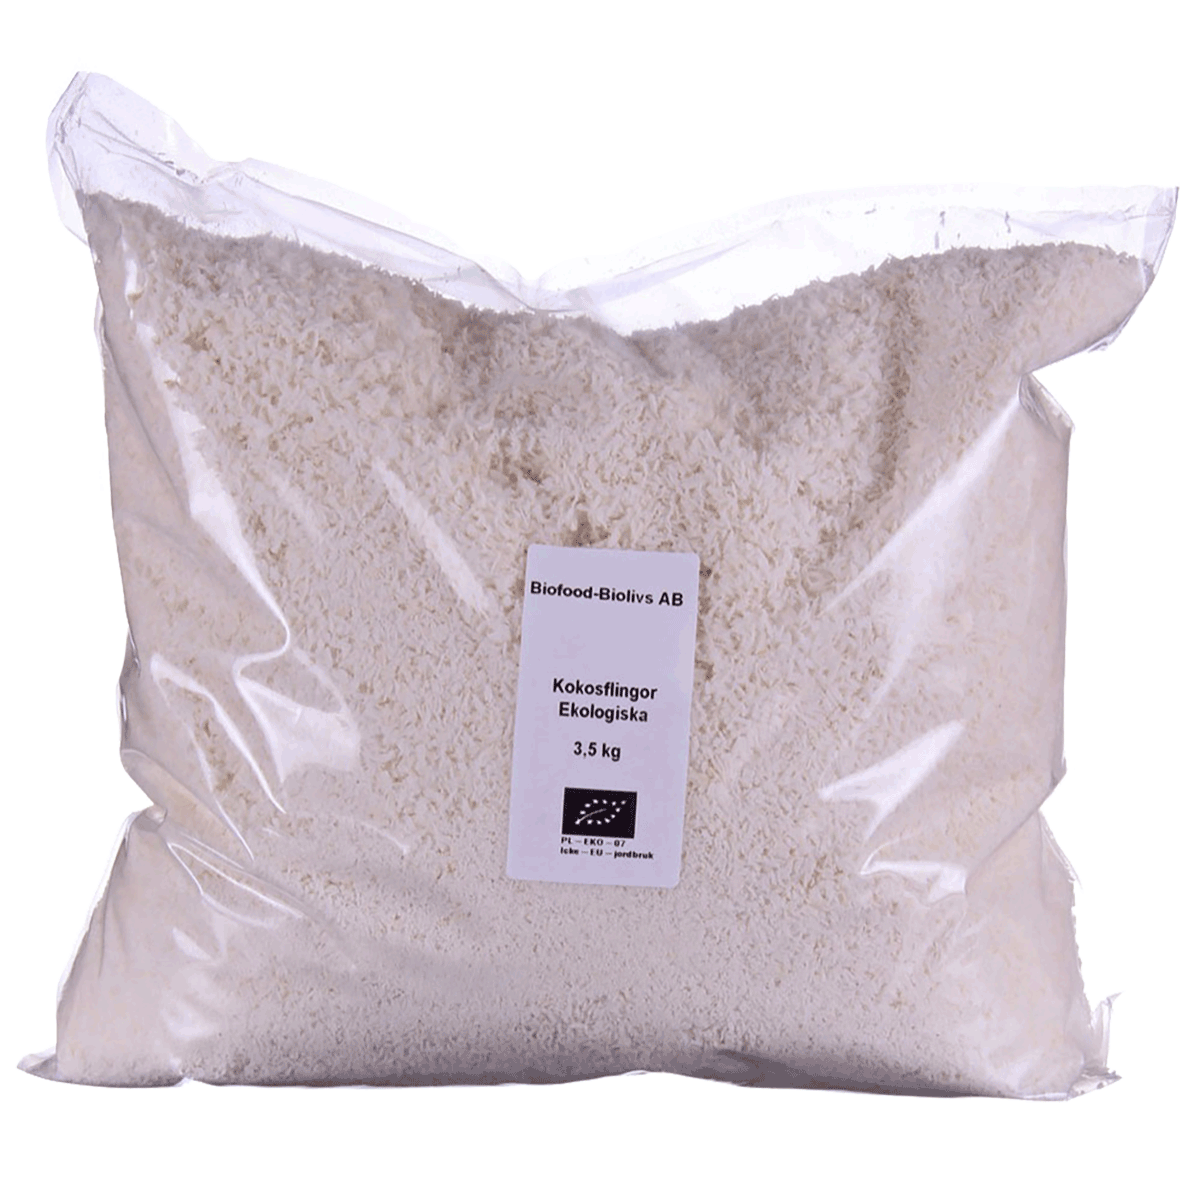 Coconut flakes from Biofood